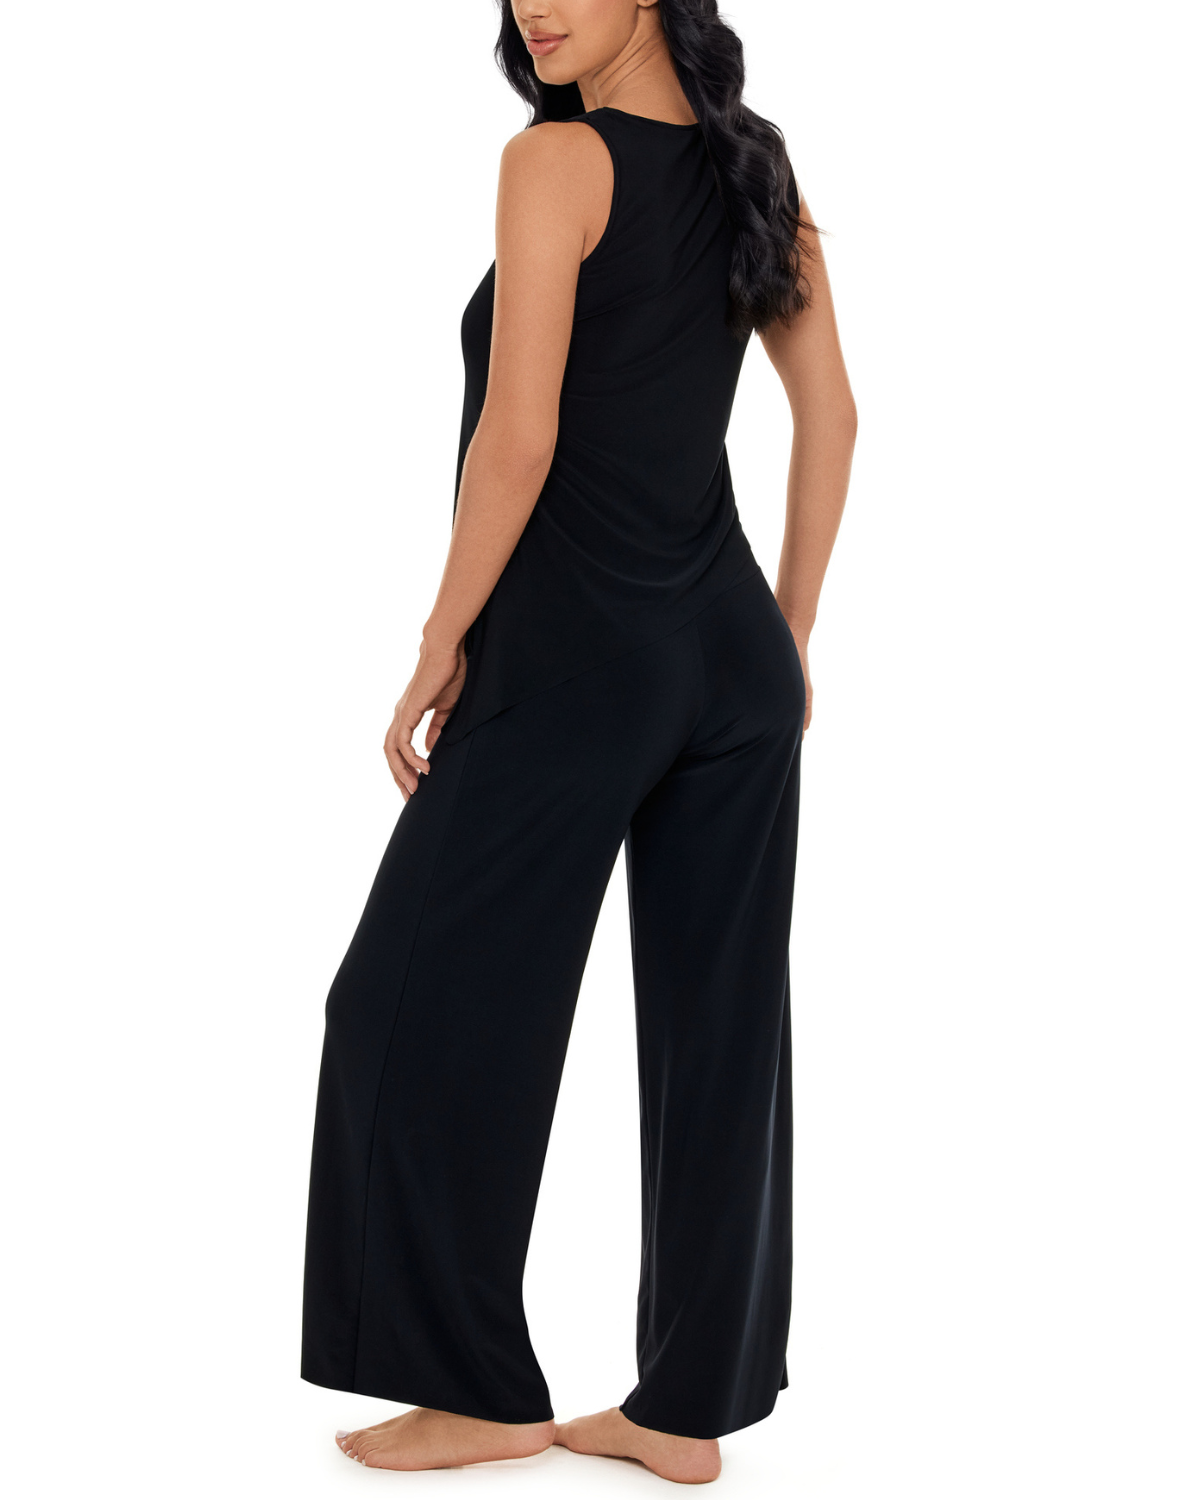 Model wearing a wide leg cover up pant in black